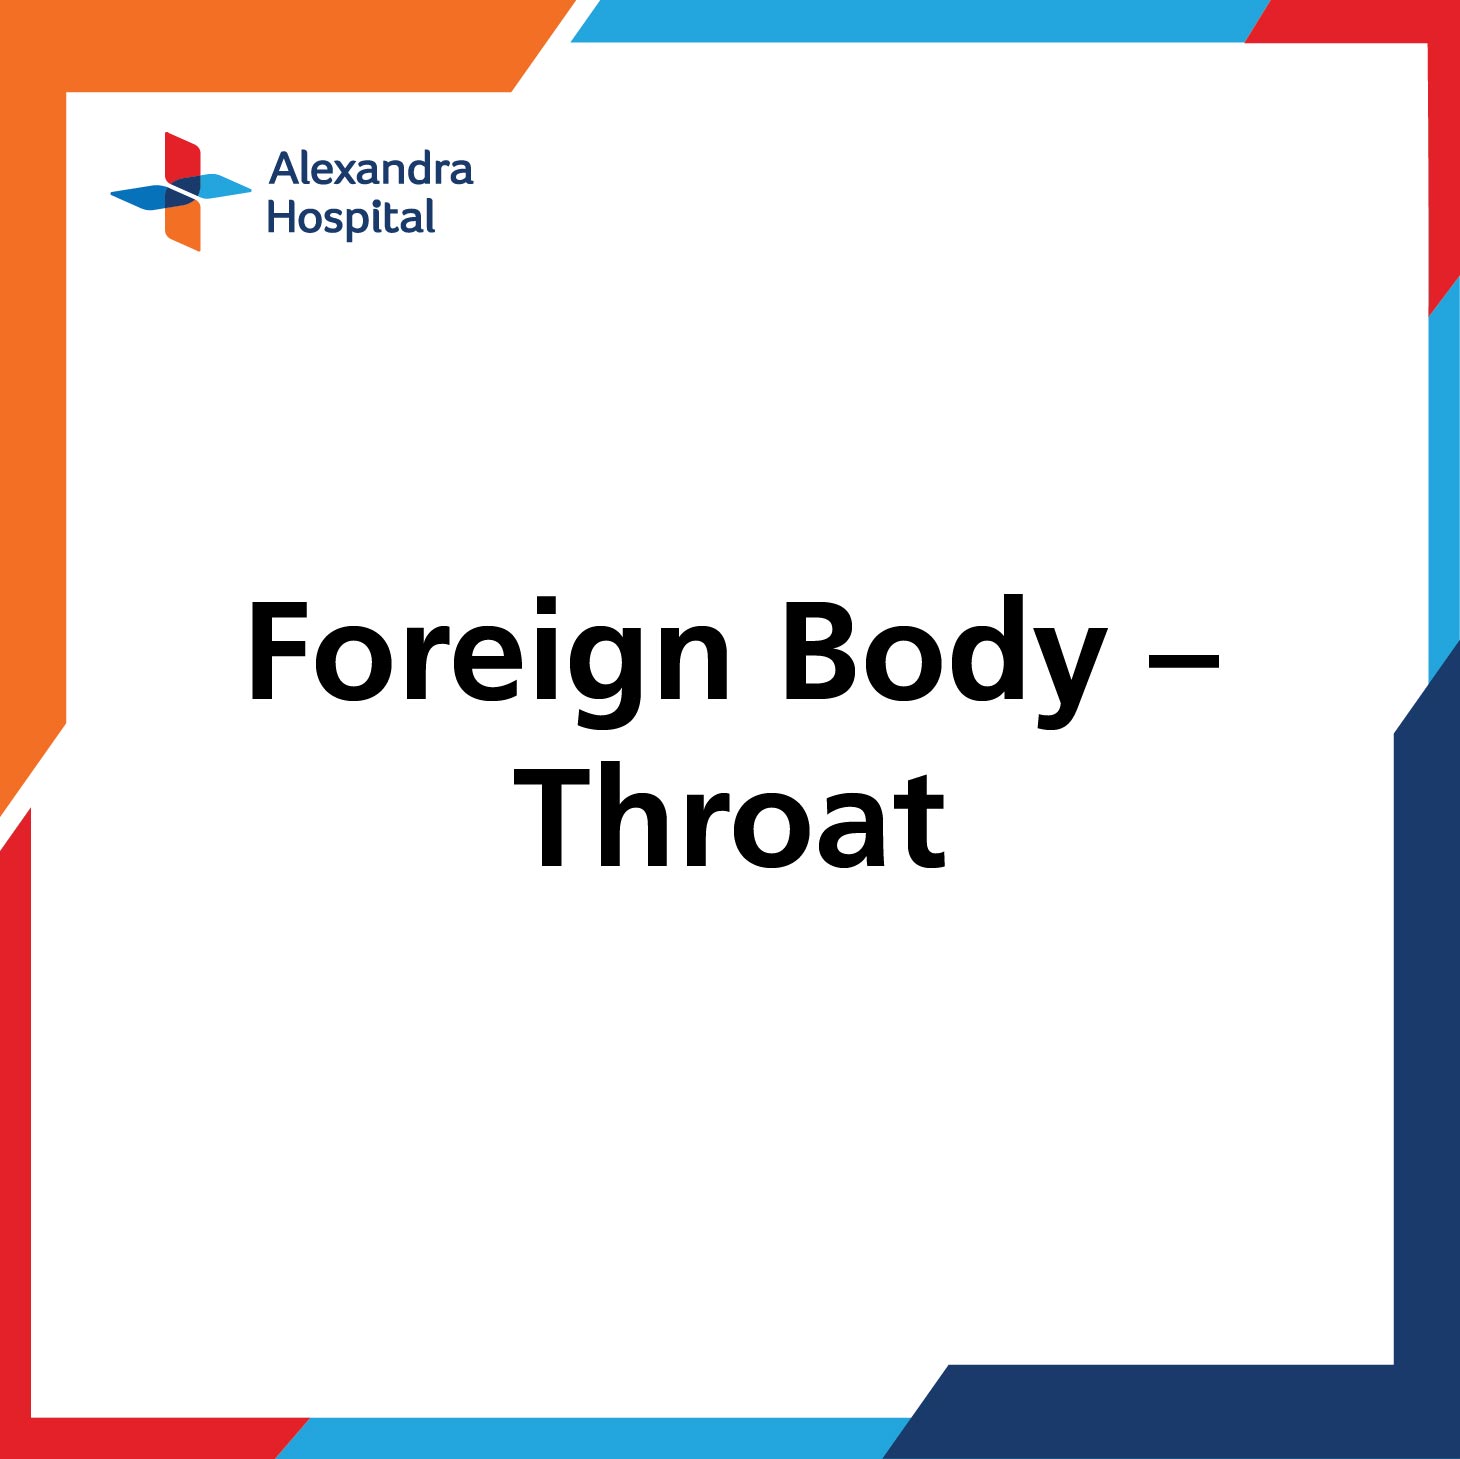 Foreign Body -Throat